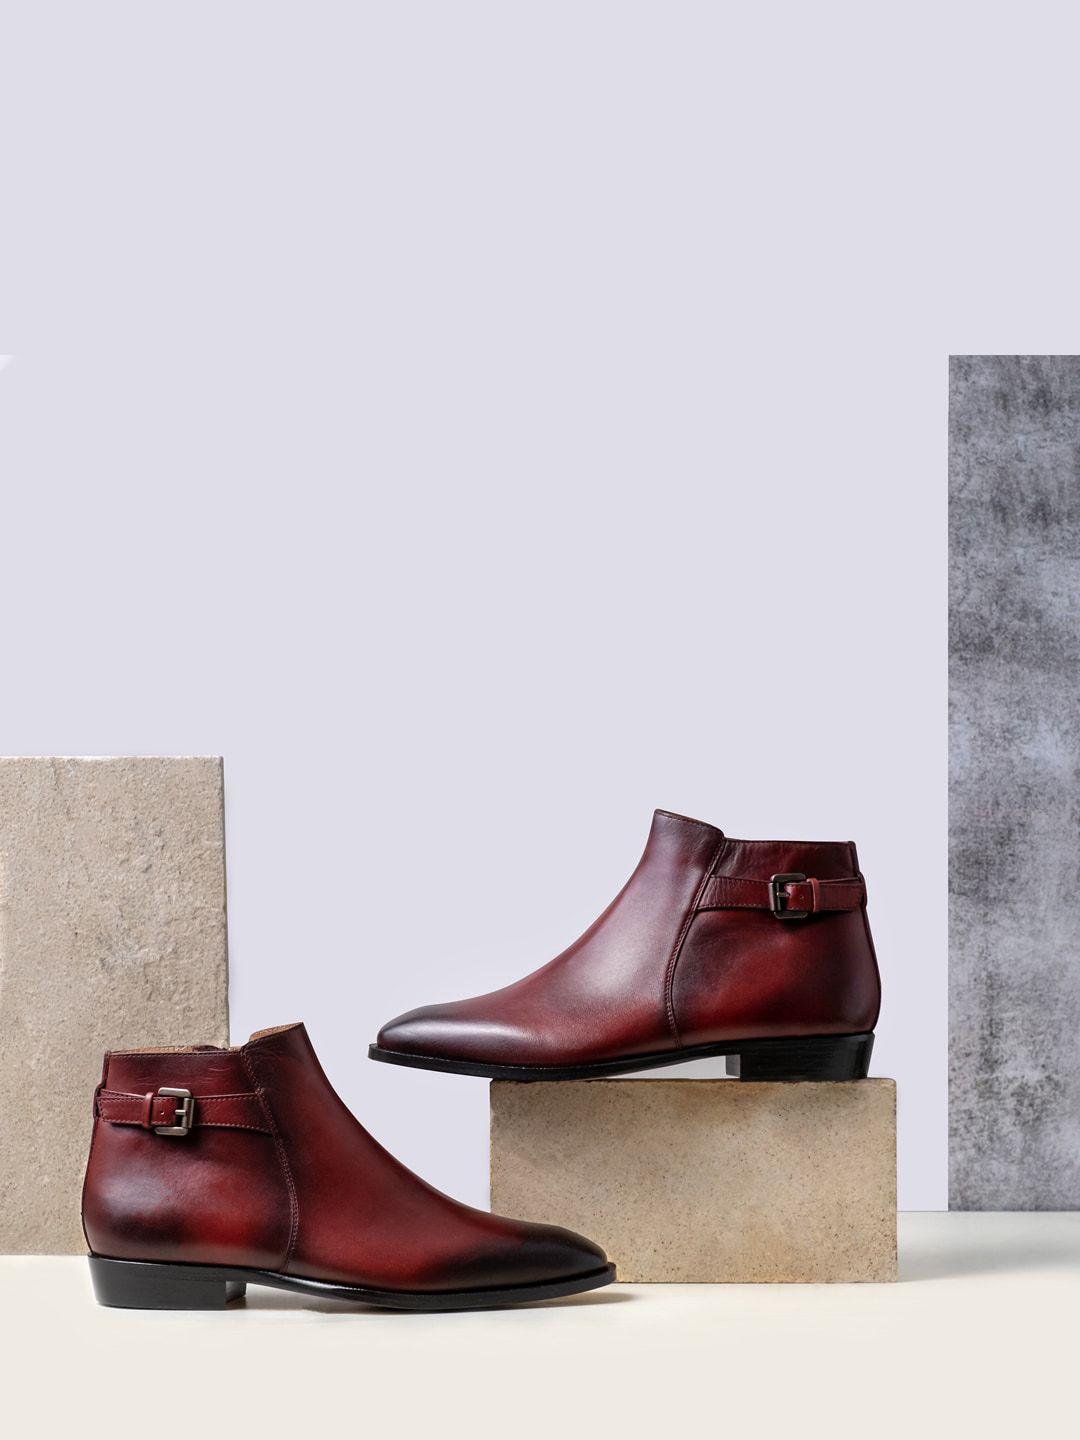 saint g men red textured ankle-length leather boots